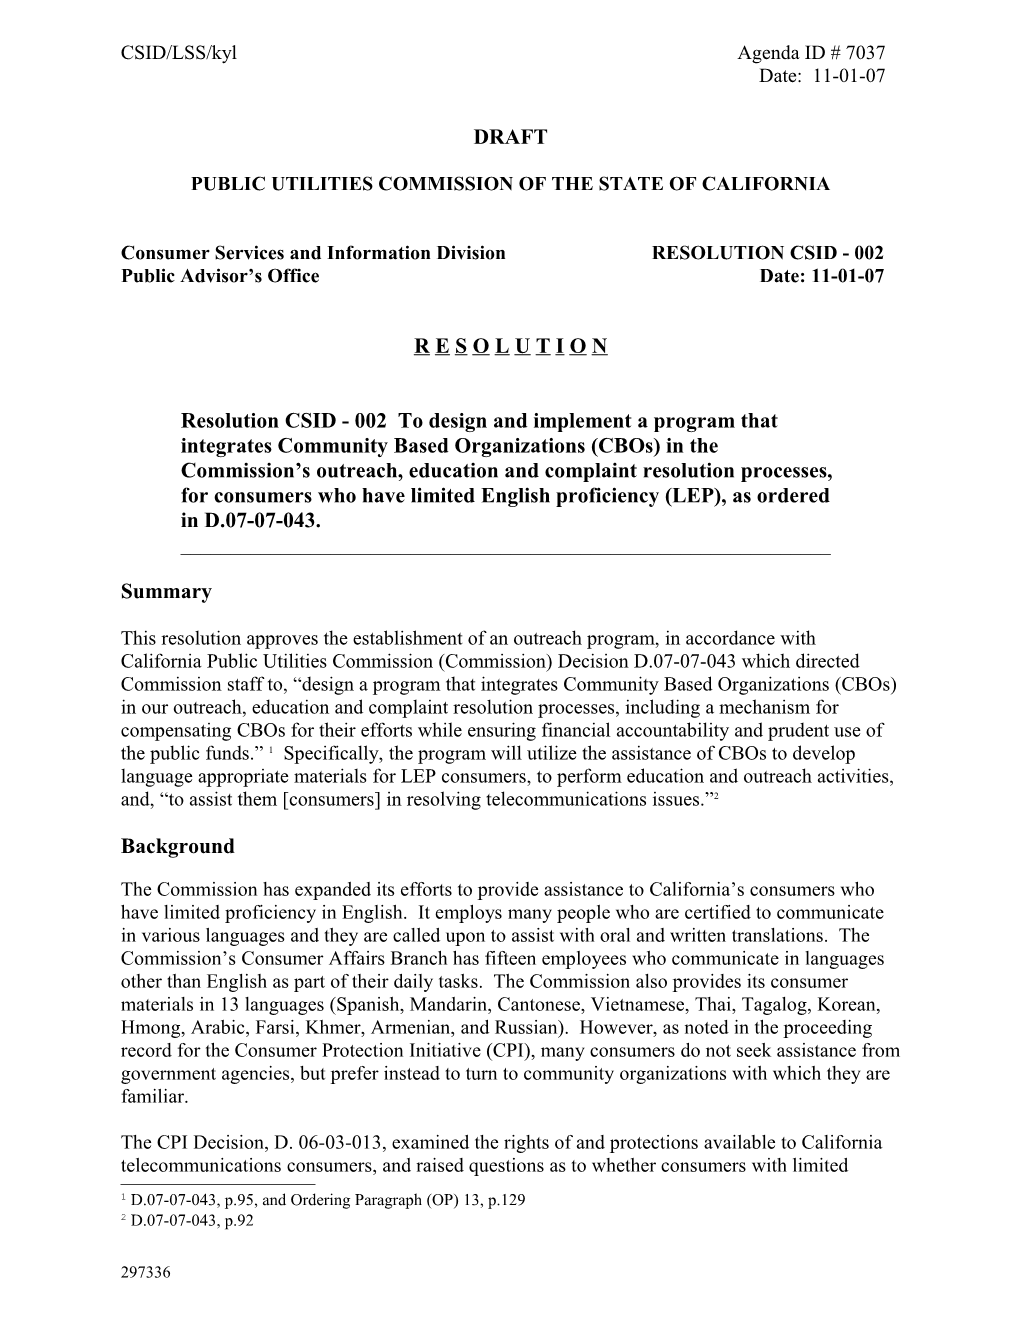 Public Utilities Commission of the State of California s104